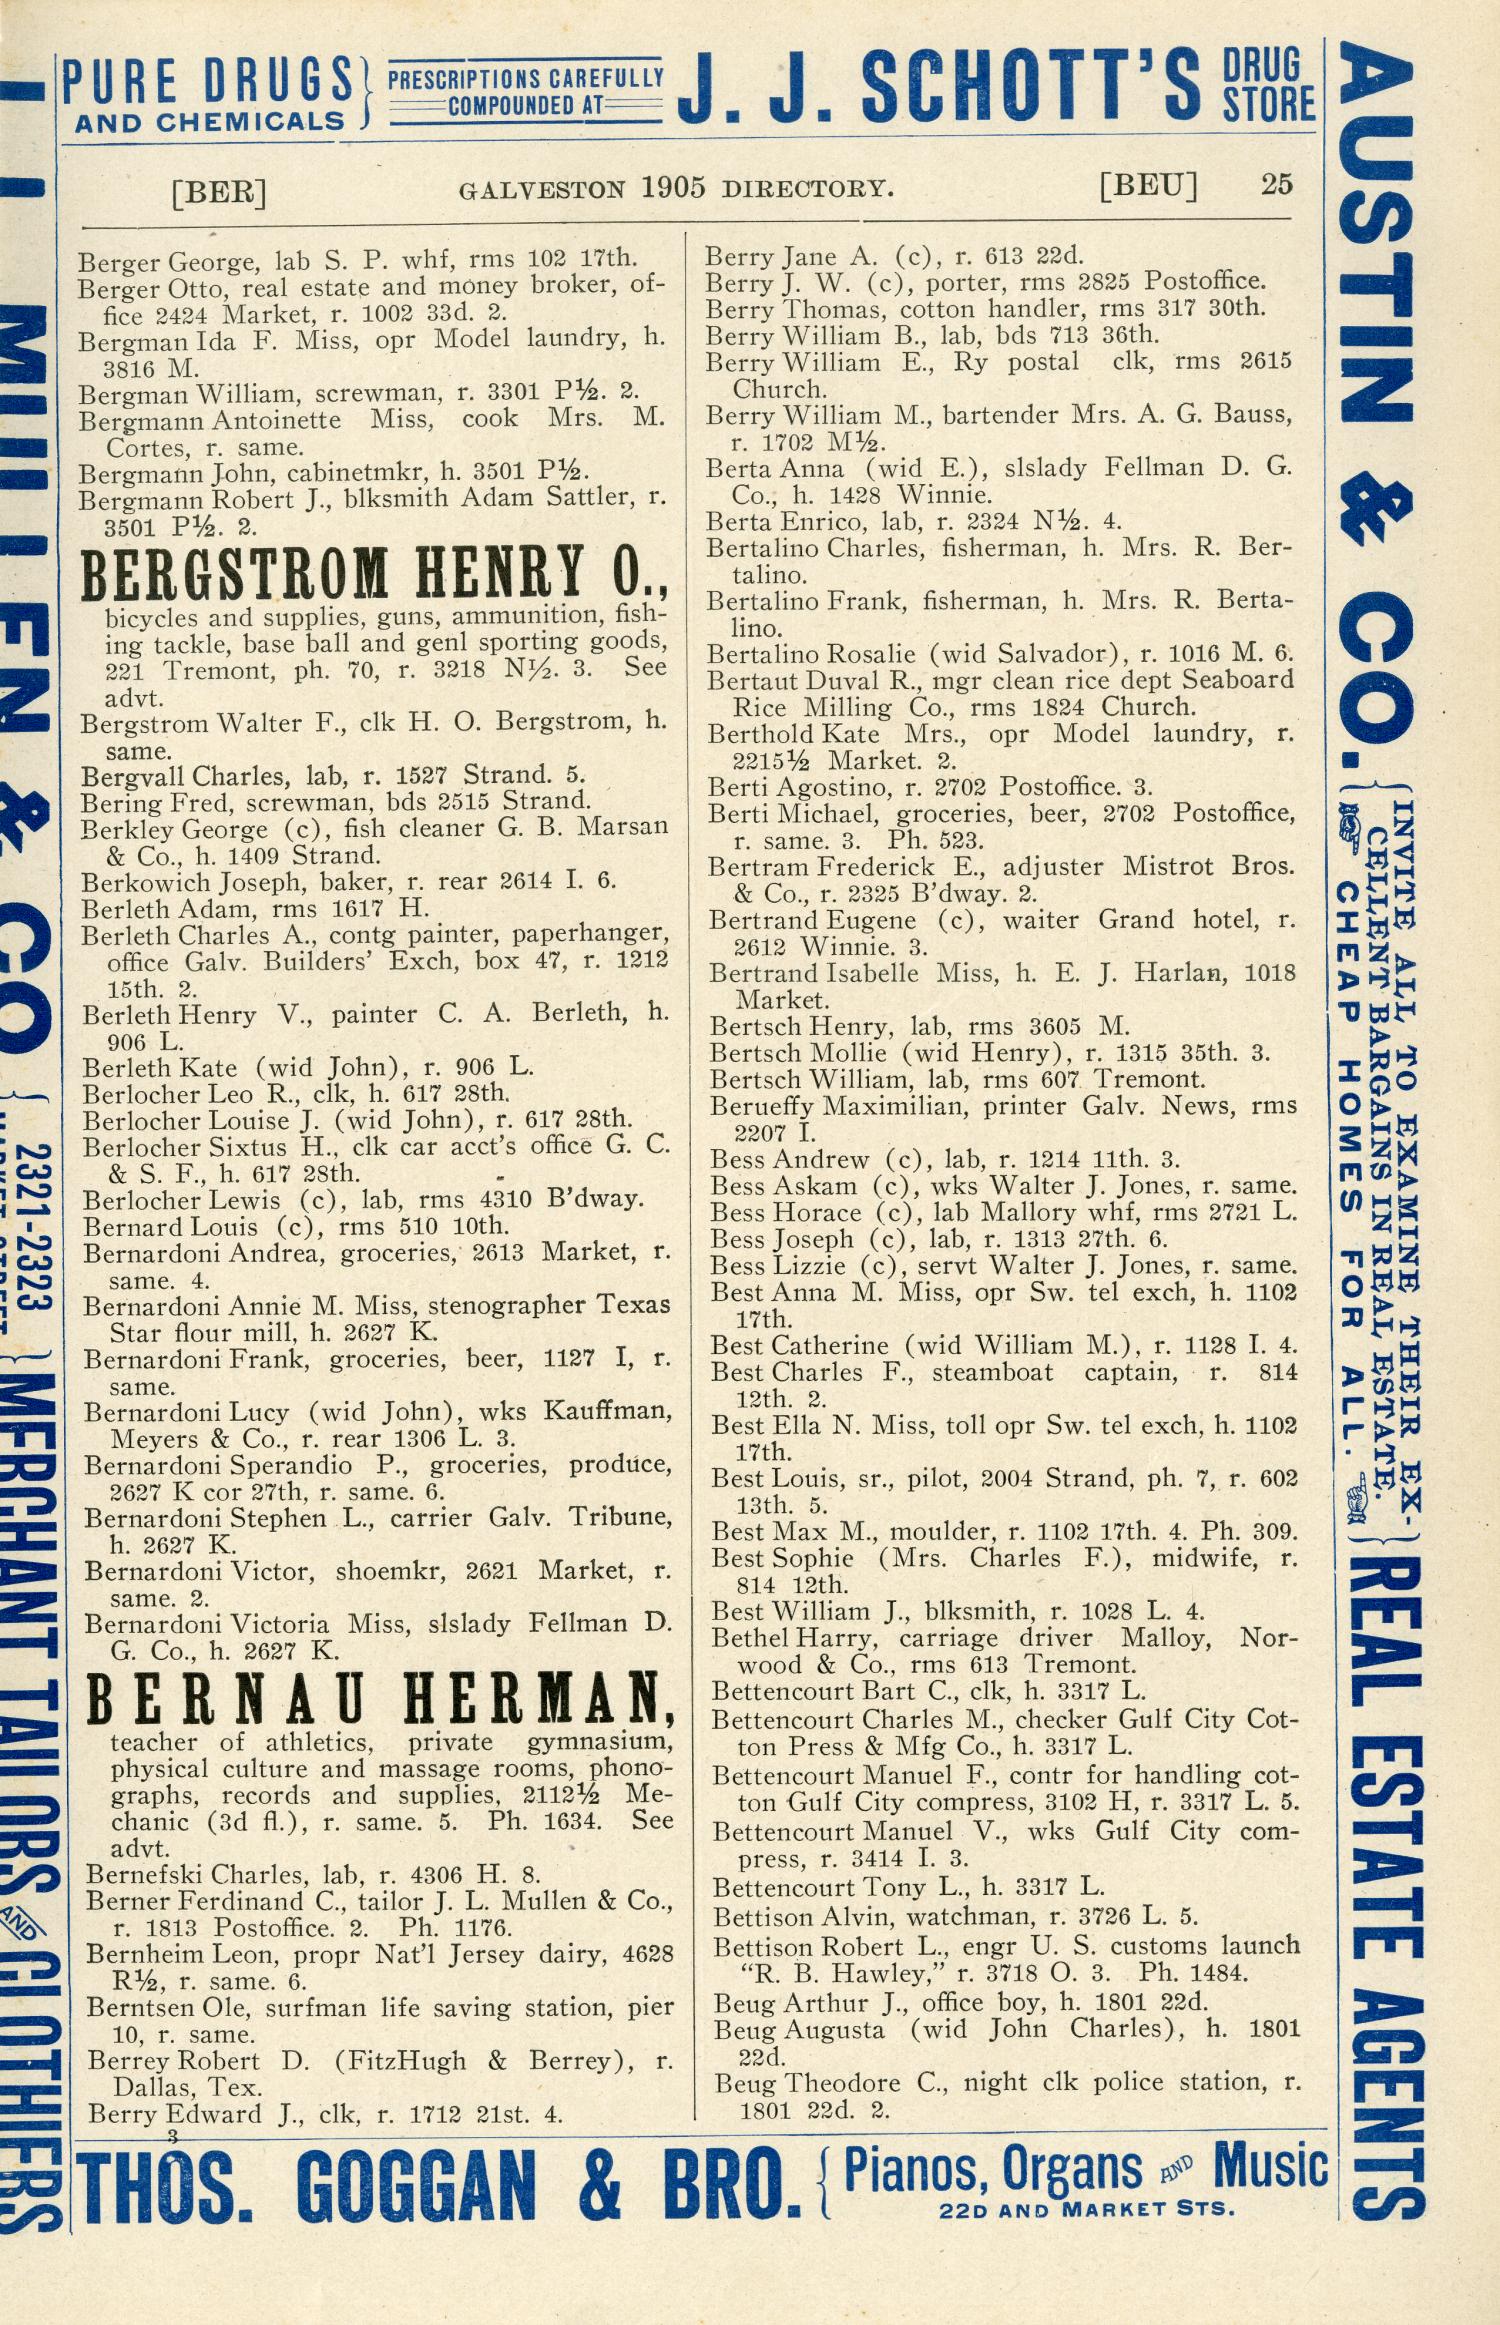 Morrison & Fourmy's General Directory of the City of Galveston: 1905
                                                
                                                    25
                                                